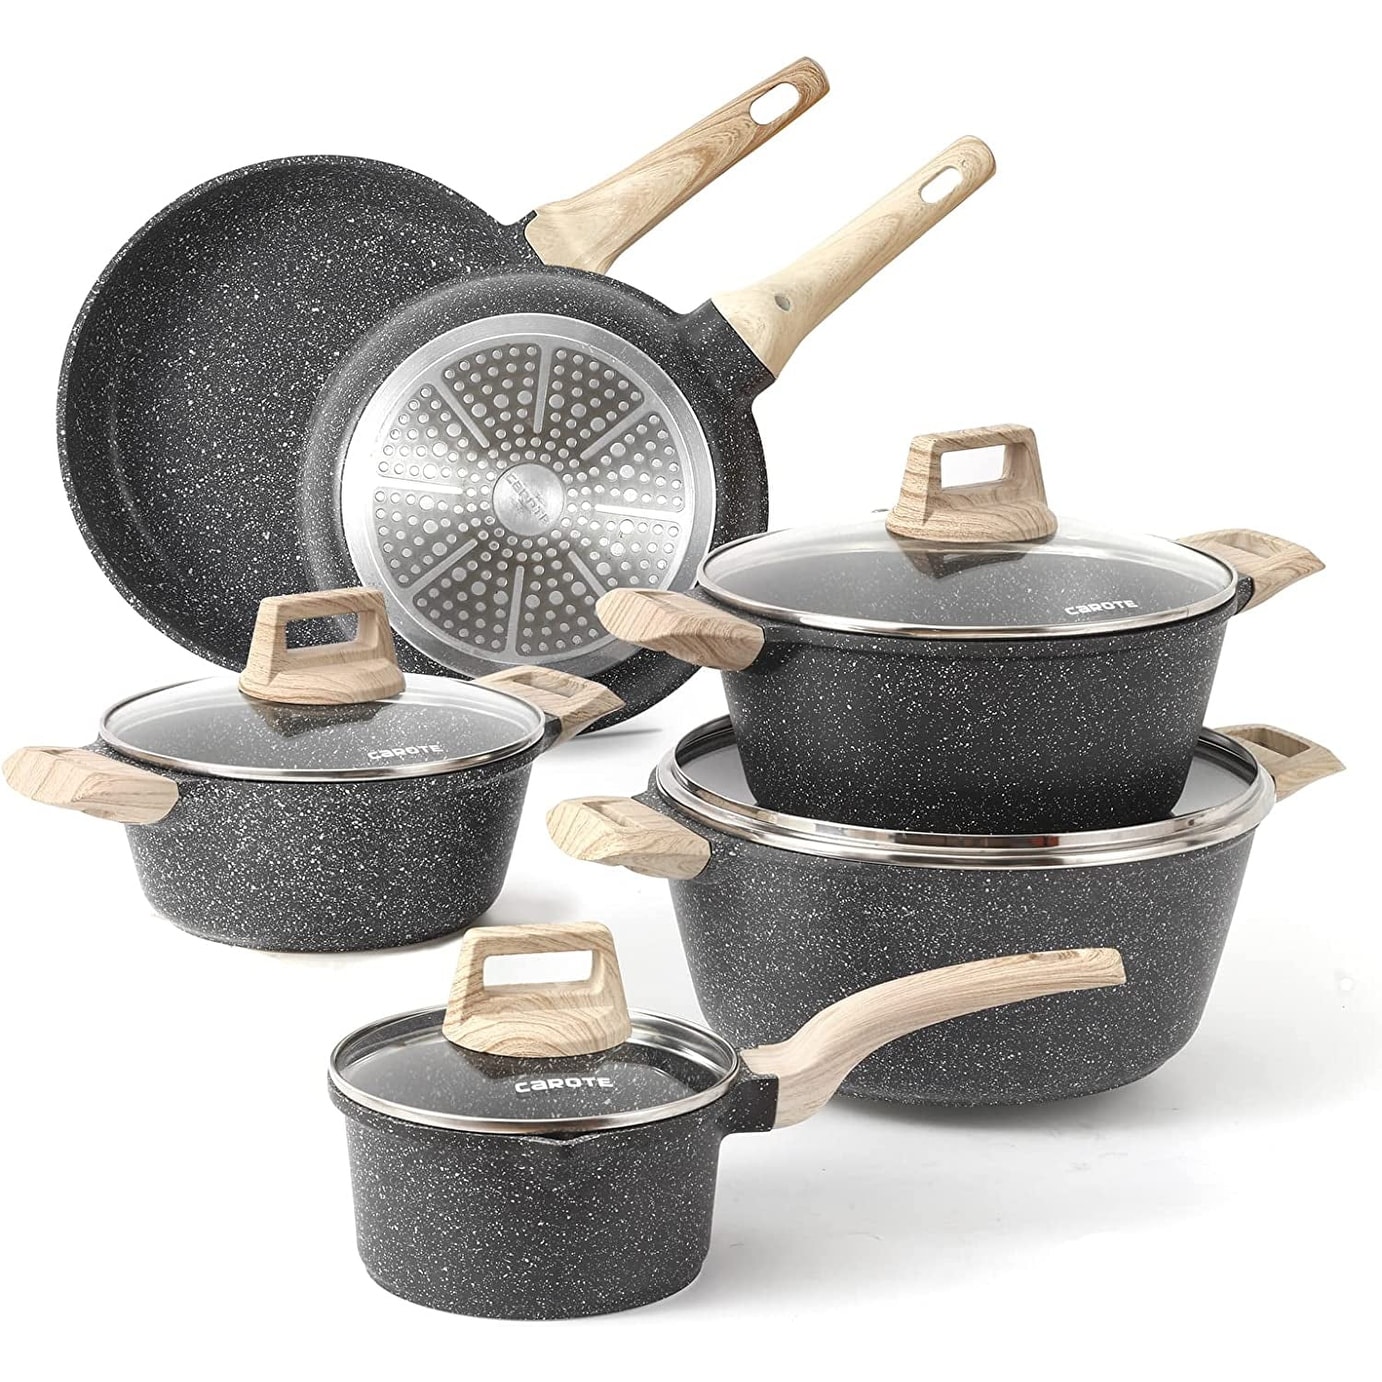 https://ak1.ostkcdn.com/images/products/is/images/direct/068cb70cd94942d51ccbba84b5e0bf5e0b8f830a/Nonstick-Pots-and-Pans-Set%2C-10-Pcs-Granite-Stone-Kitchen-Cookware-Sets-%28Black%29.jpg